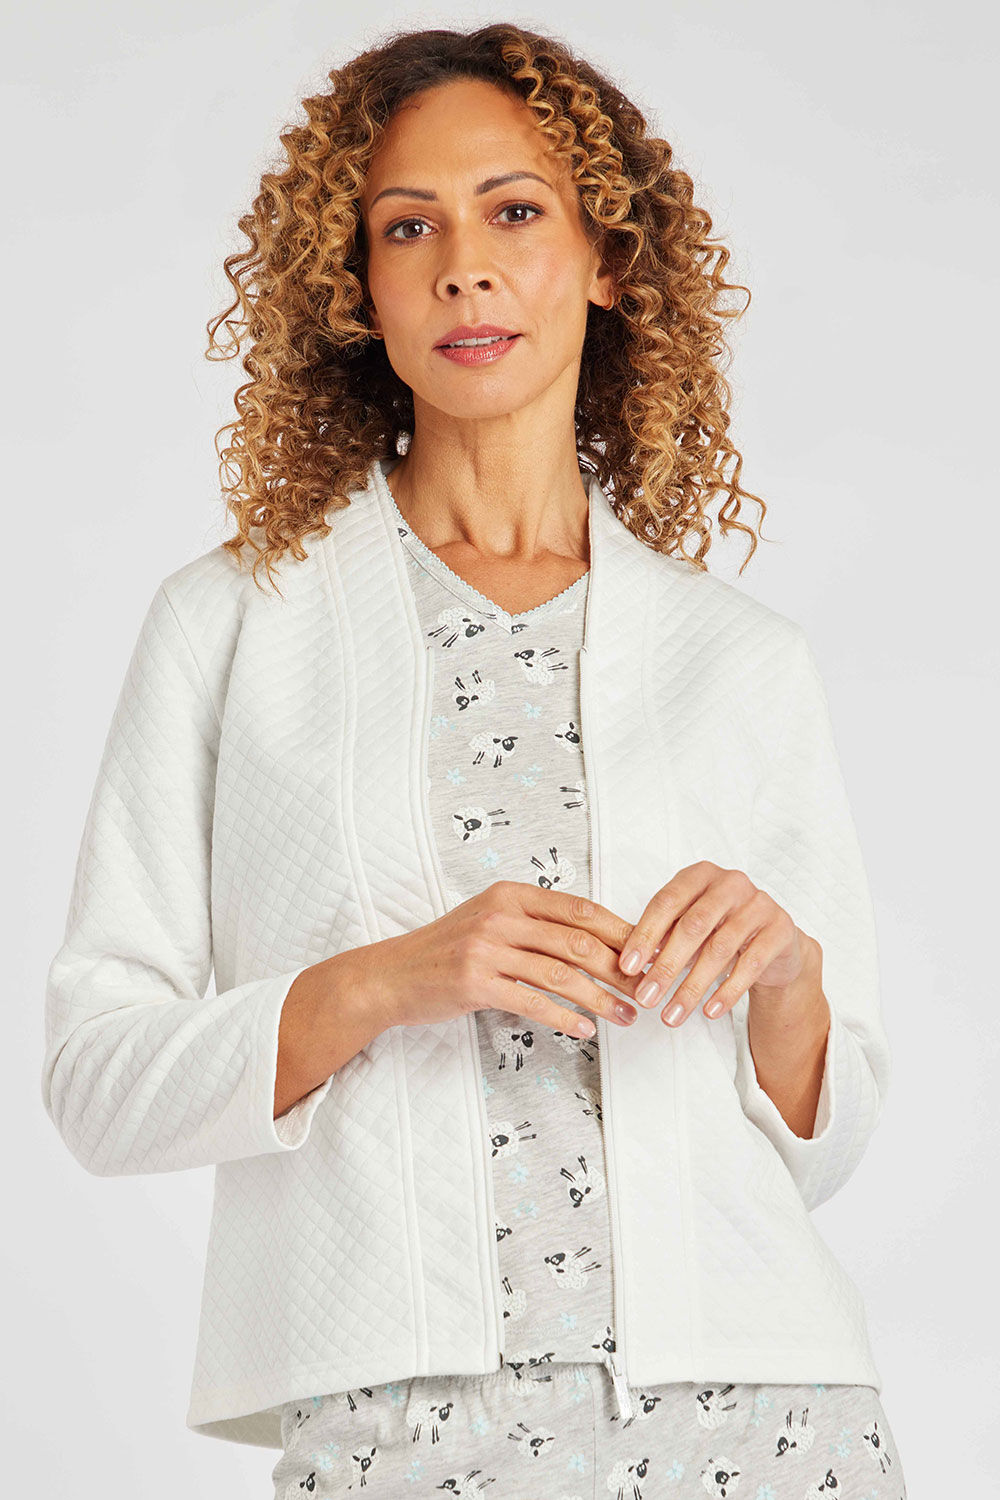 Bonmarche Ladies White Quilted Diamond Bed Jacket with Zip Through Design, Size: 12-14